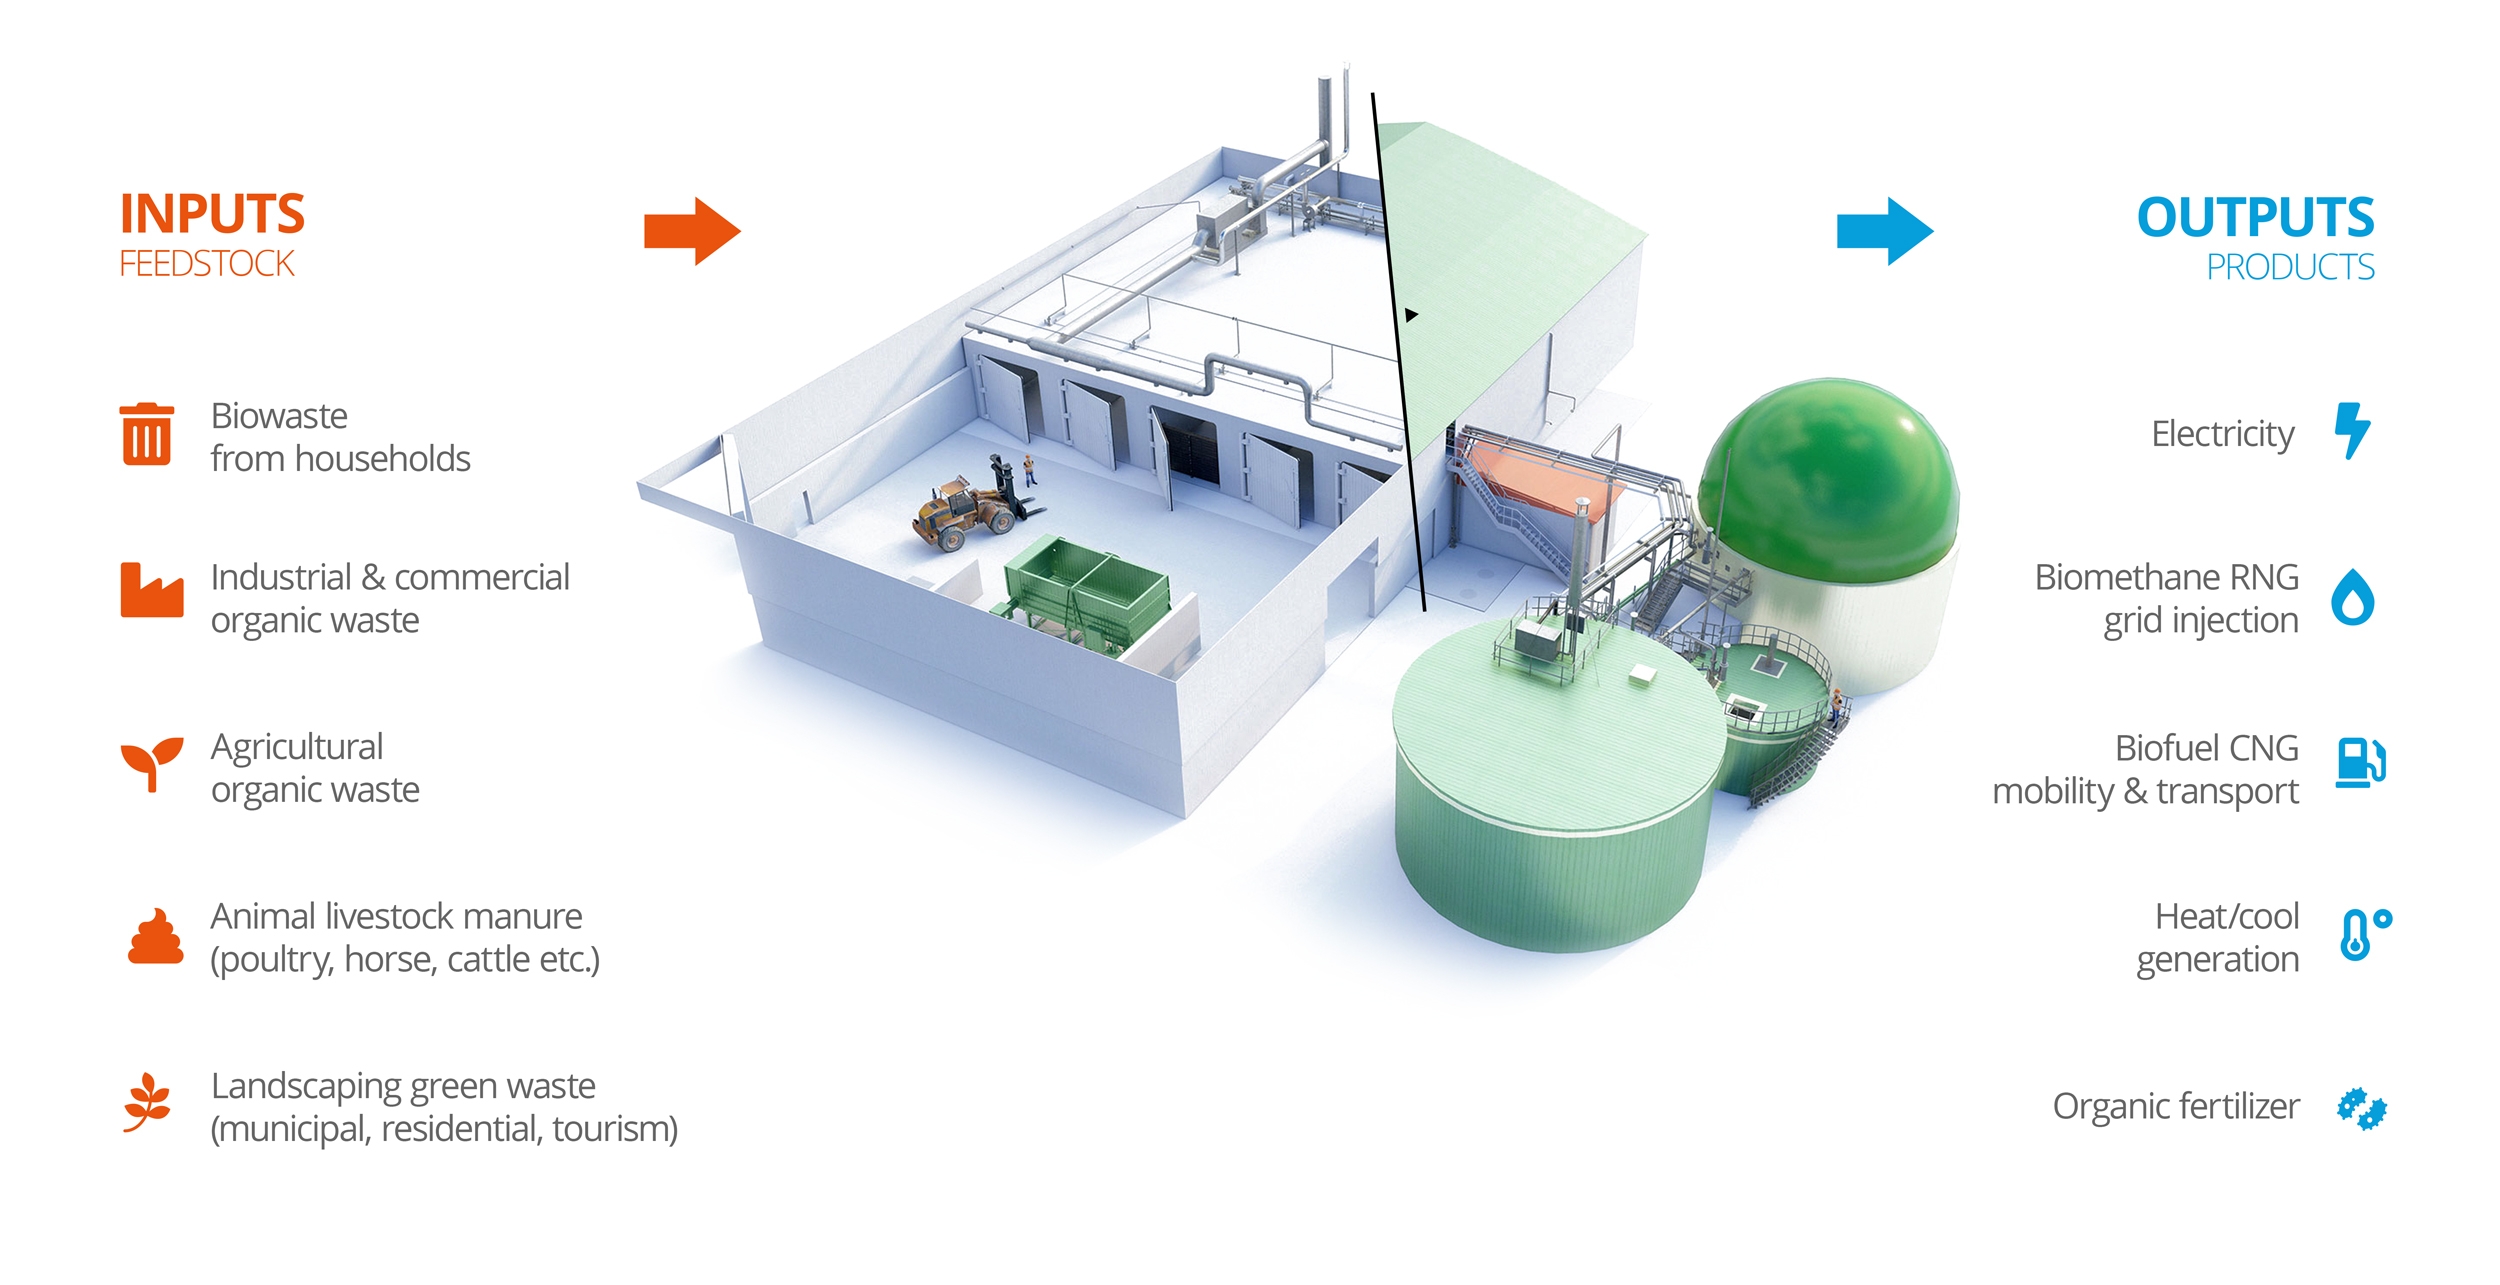 Anaerobic Digestion explained